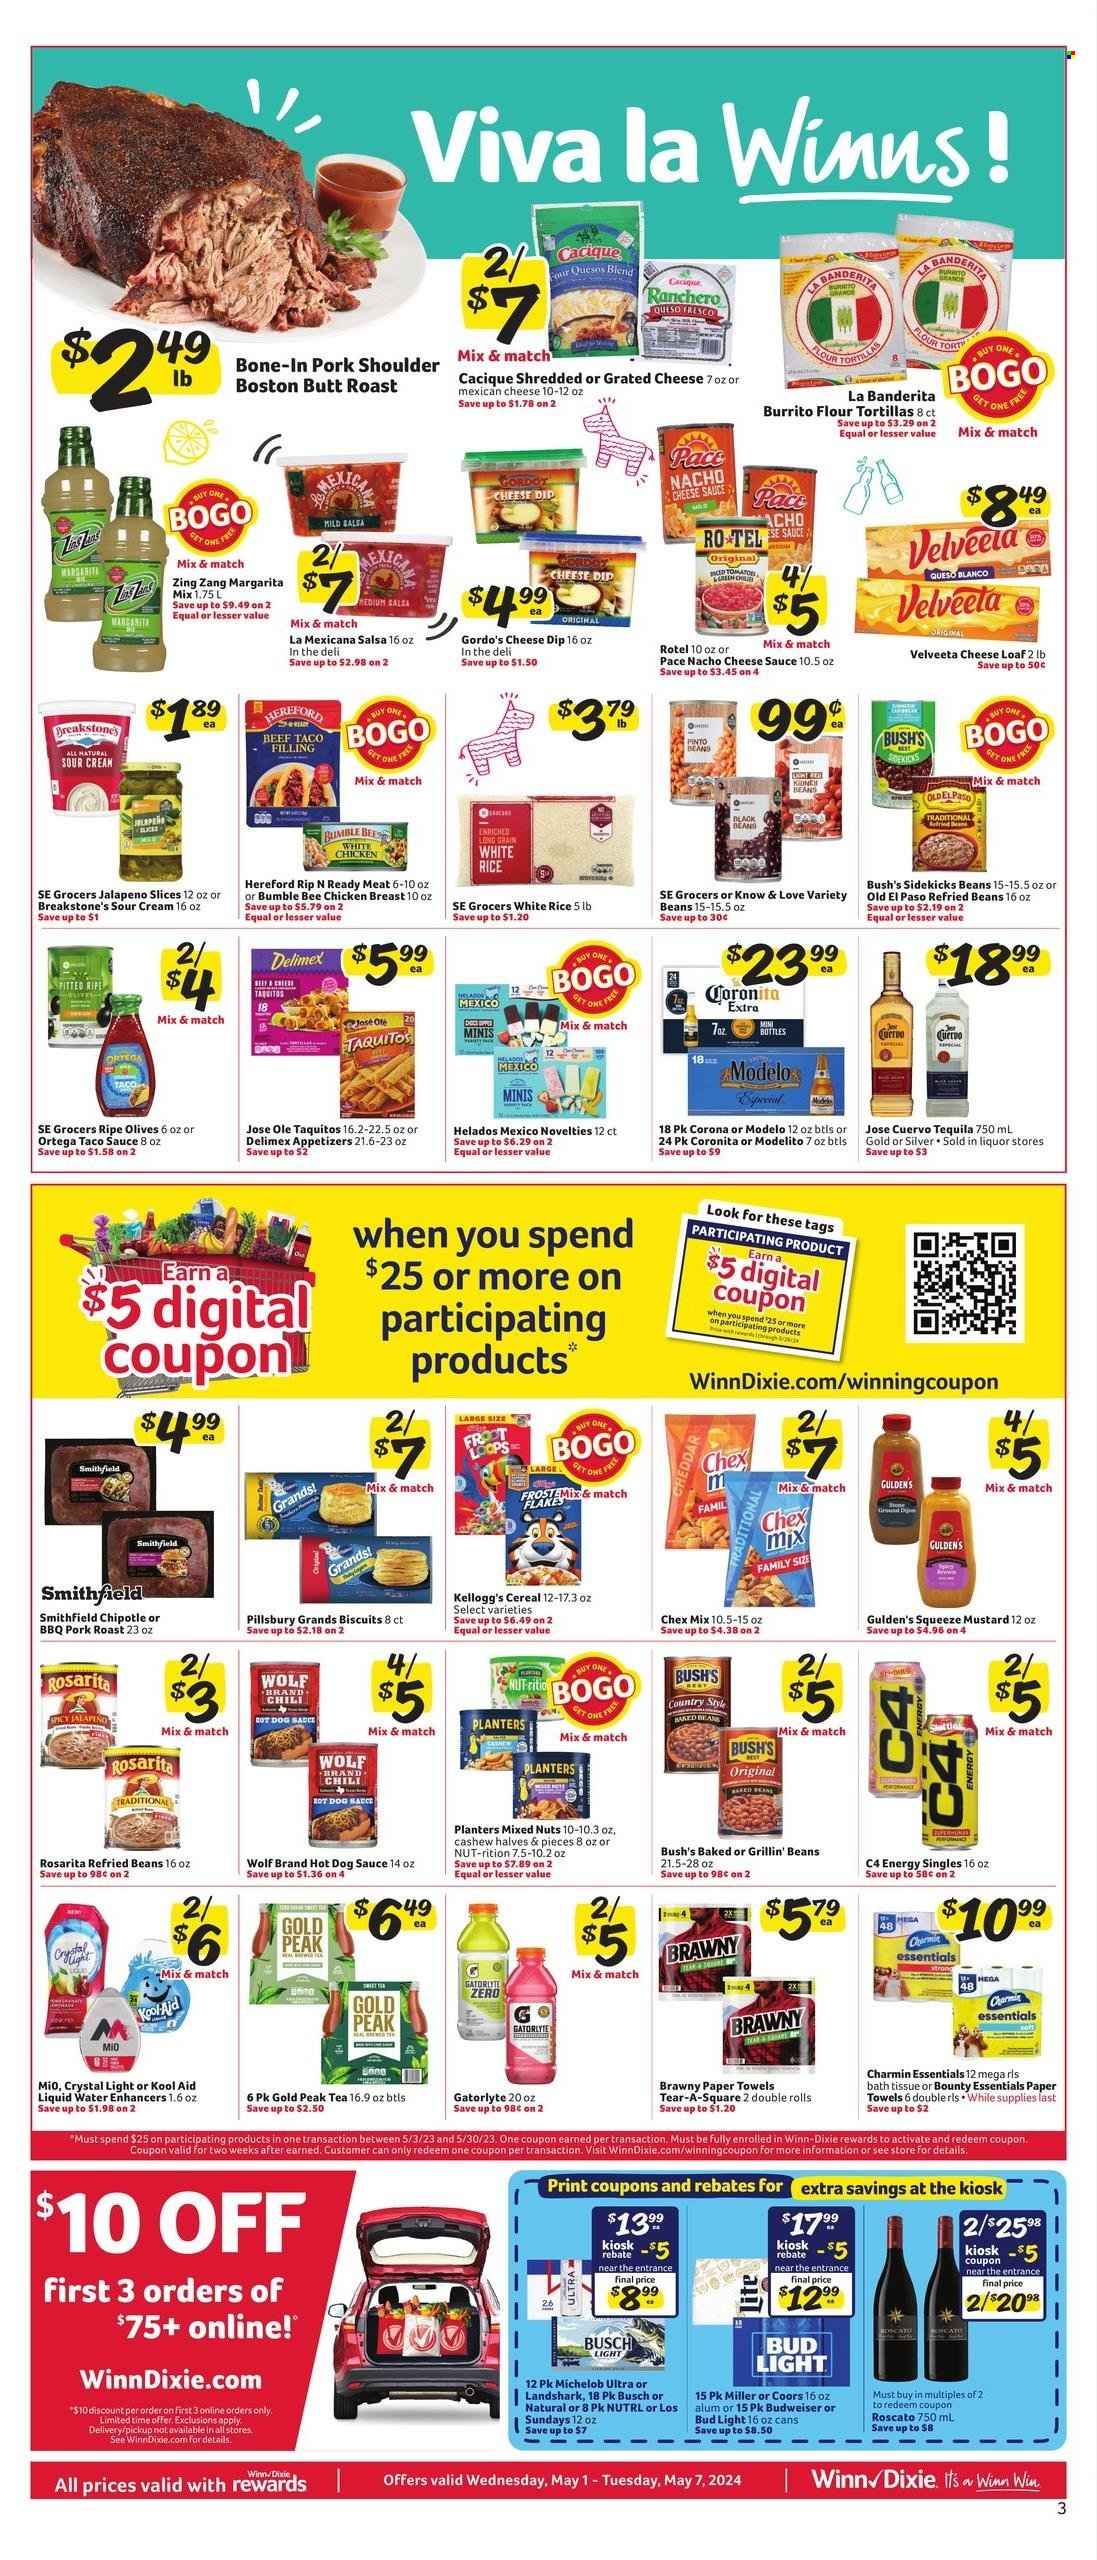 thumbnail - Winn Dixie Flyer - 05/01/2024 - 05/07/2024 - Sales products - pork roast, roast, pork meat, Old El Paso, beans, refried beans, Margarita Mix, cheese, grated cheese, boston butt, pork shoulder, tortillas, flour tortillas, syrup, powder drink, Pillsbury, biscuit, kitchen towels, paper towels, dip, Kellogg's, cereals, mixed nuts, Planters, baked beans, Bounty, bath tissue, Charmin, electrolyte drink, beer, Budweiser, Bud Light, Miller, Coors, ready to drink spirits, Busch, Michelob, mustard, Chex Mix, salty snack, tequila, ice tea, Gold Peak Tea, sauce, salsa, jalapeño, sour cream, pickled vegetables, ready meal, Velveeta, Bumble Bee, chicken, rice, white rice, olives, taco sauce, taquitos, Corona Extra, Modelo. Page 6.